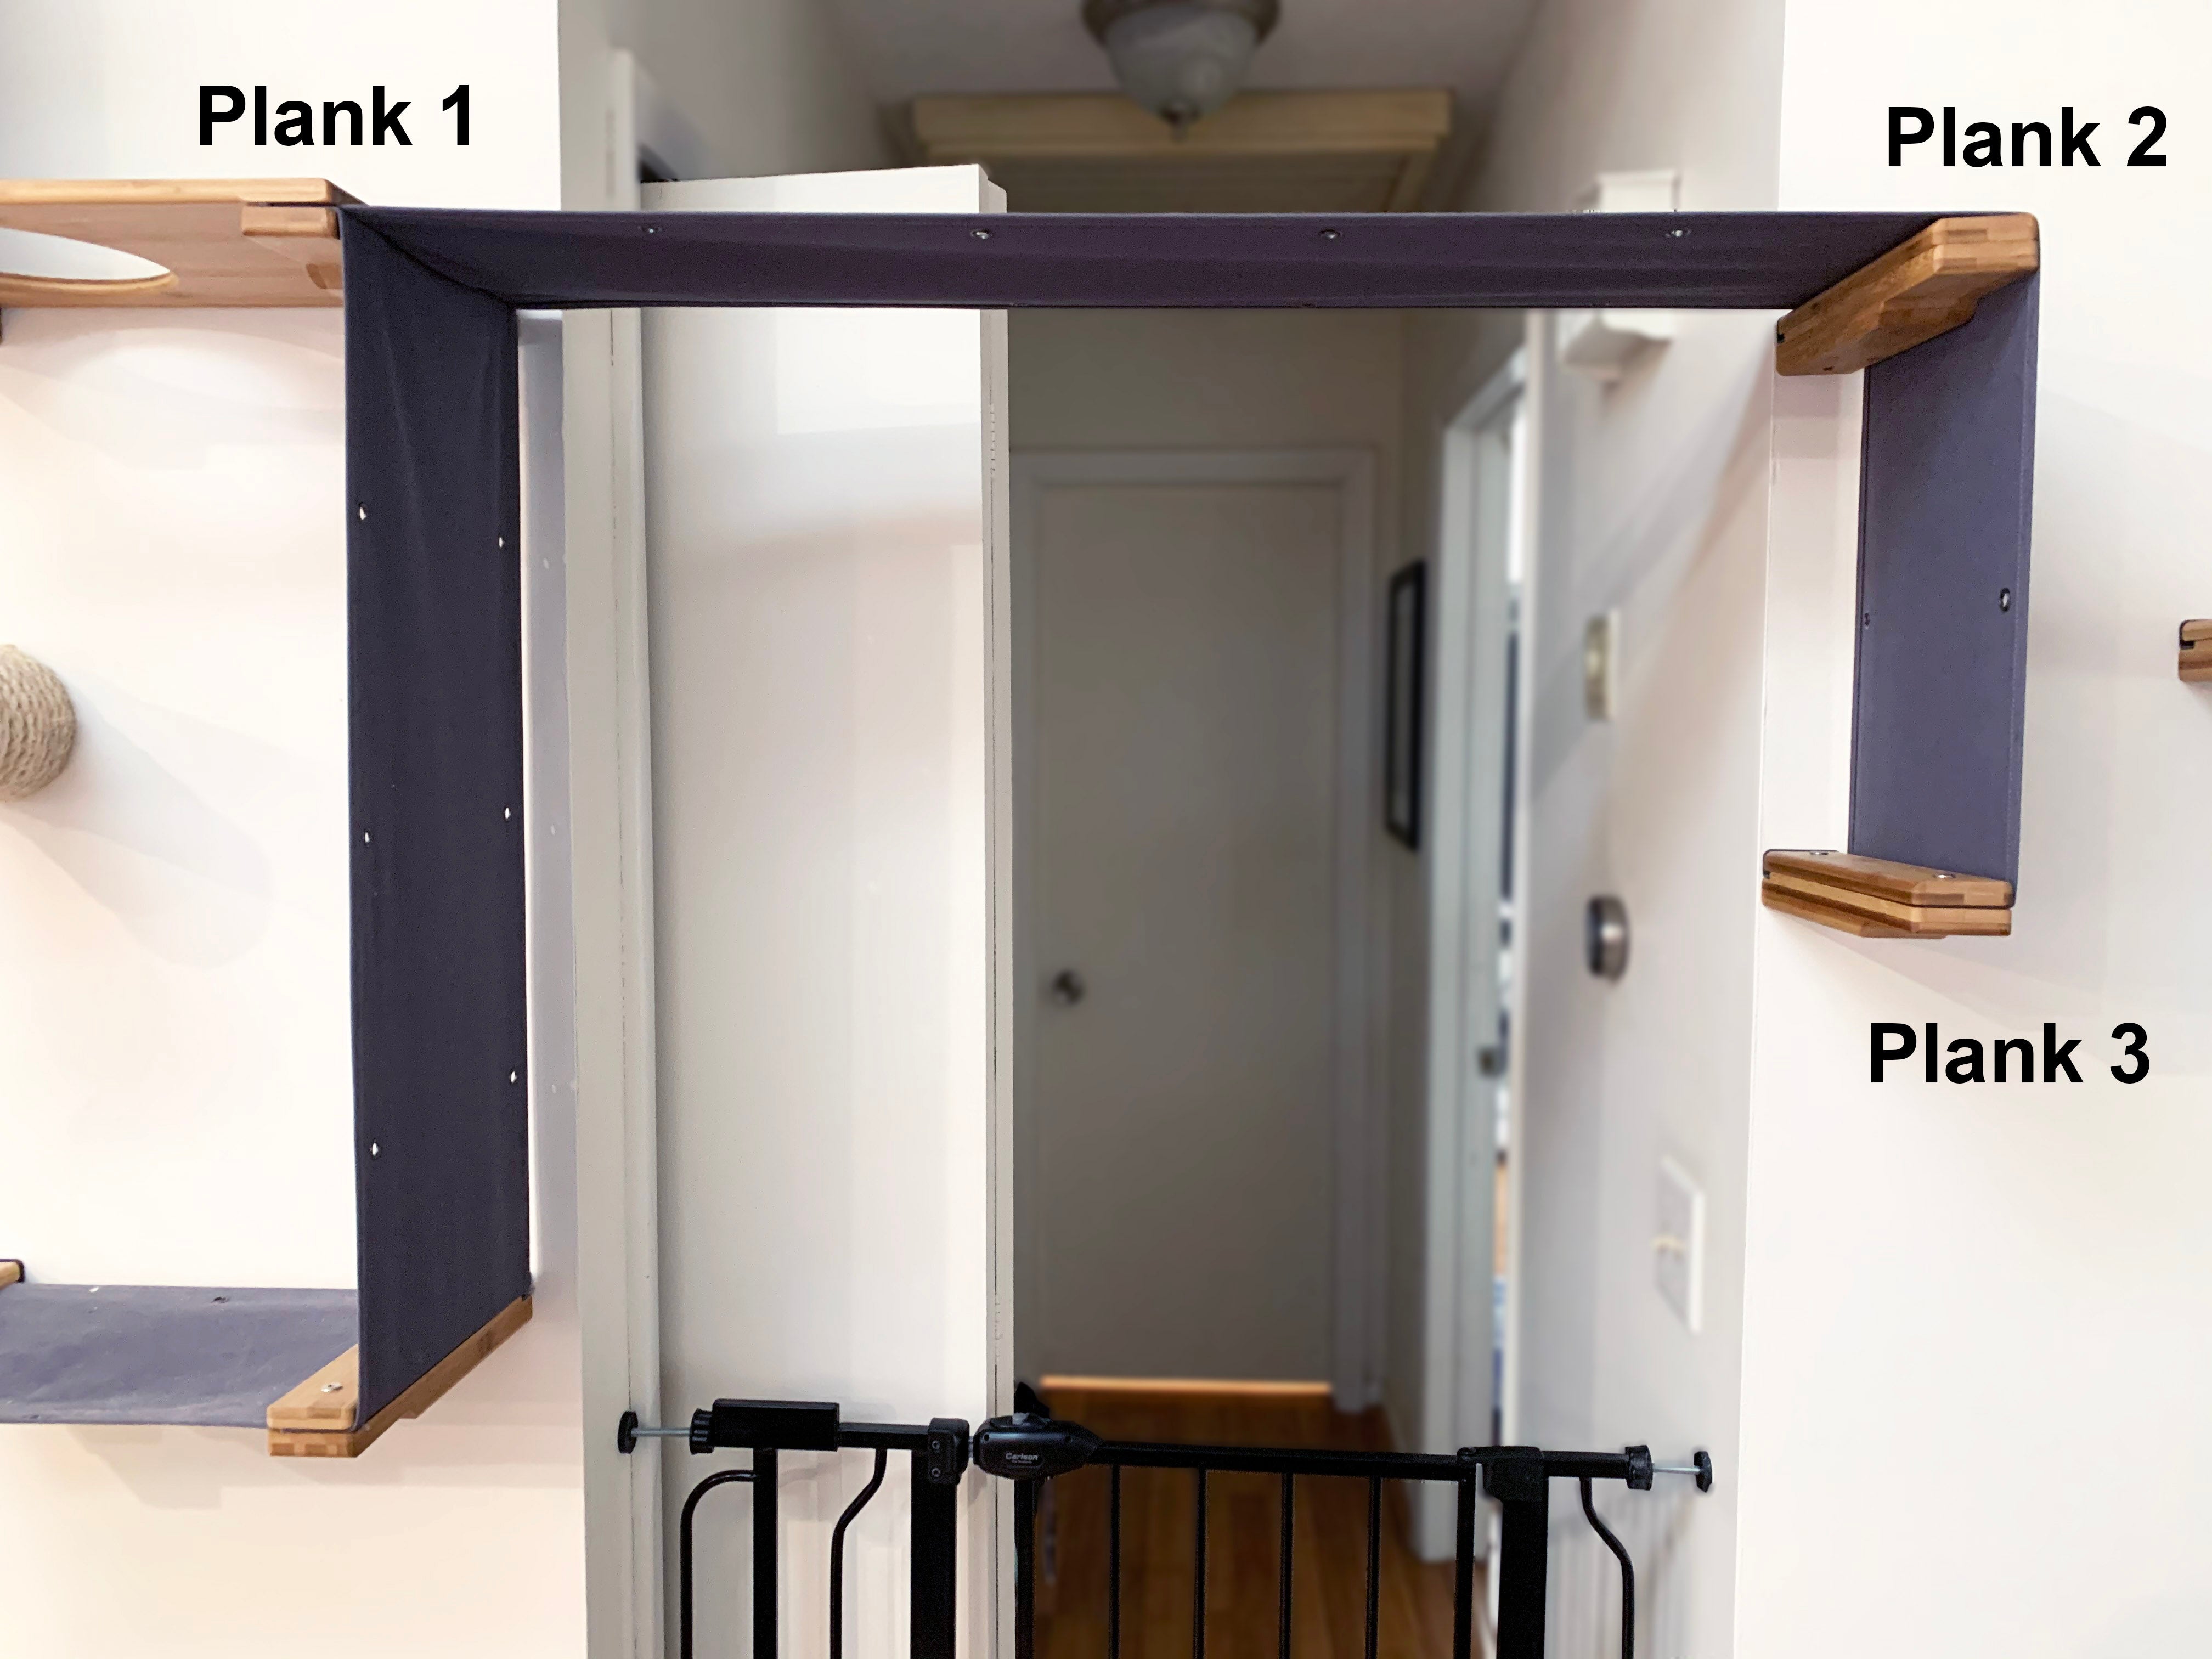 demonstration of cat wall design to extend across a hallway opening